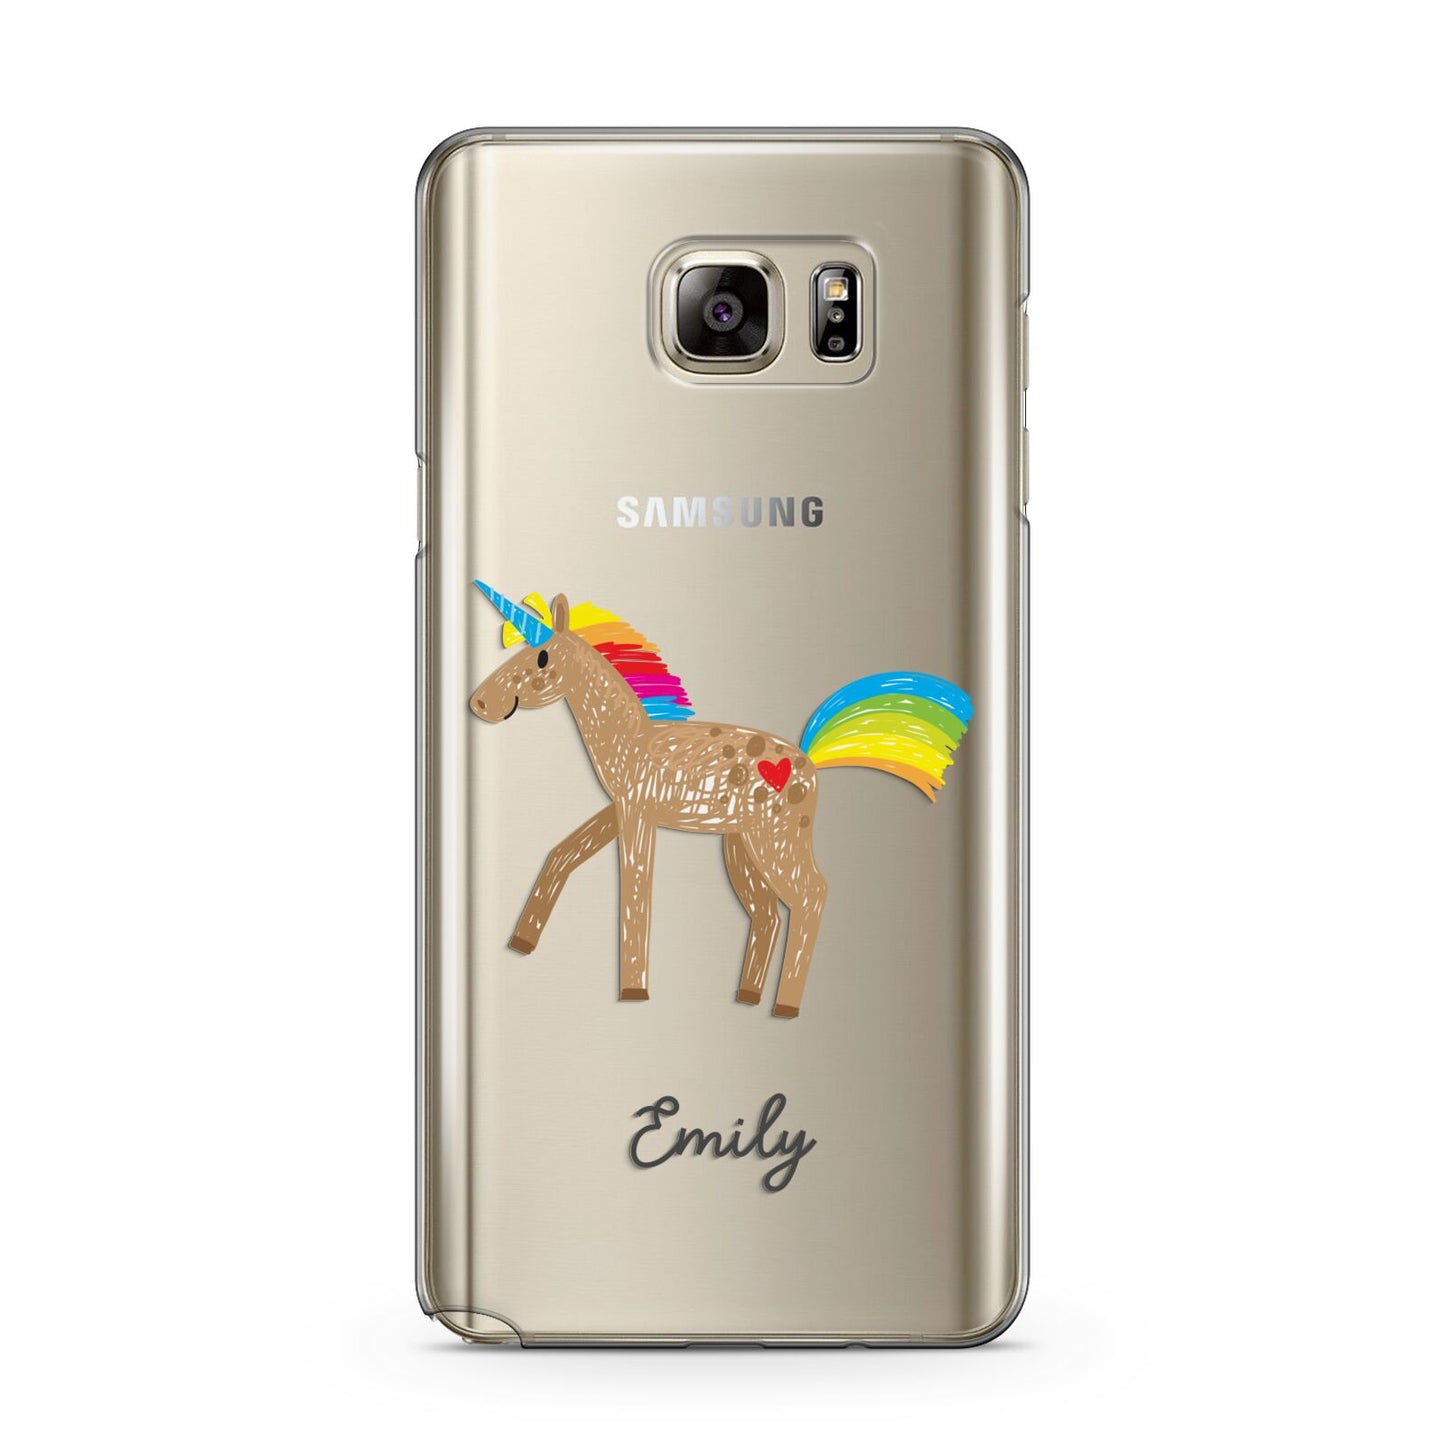 Personalised Unicorn with Name Samsung Galaxy Note 5 Case